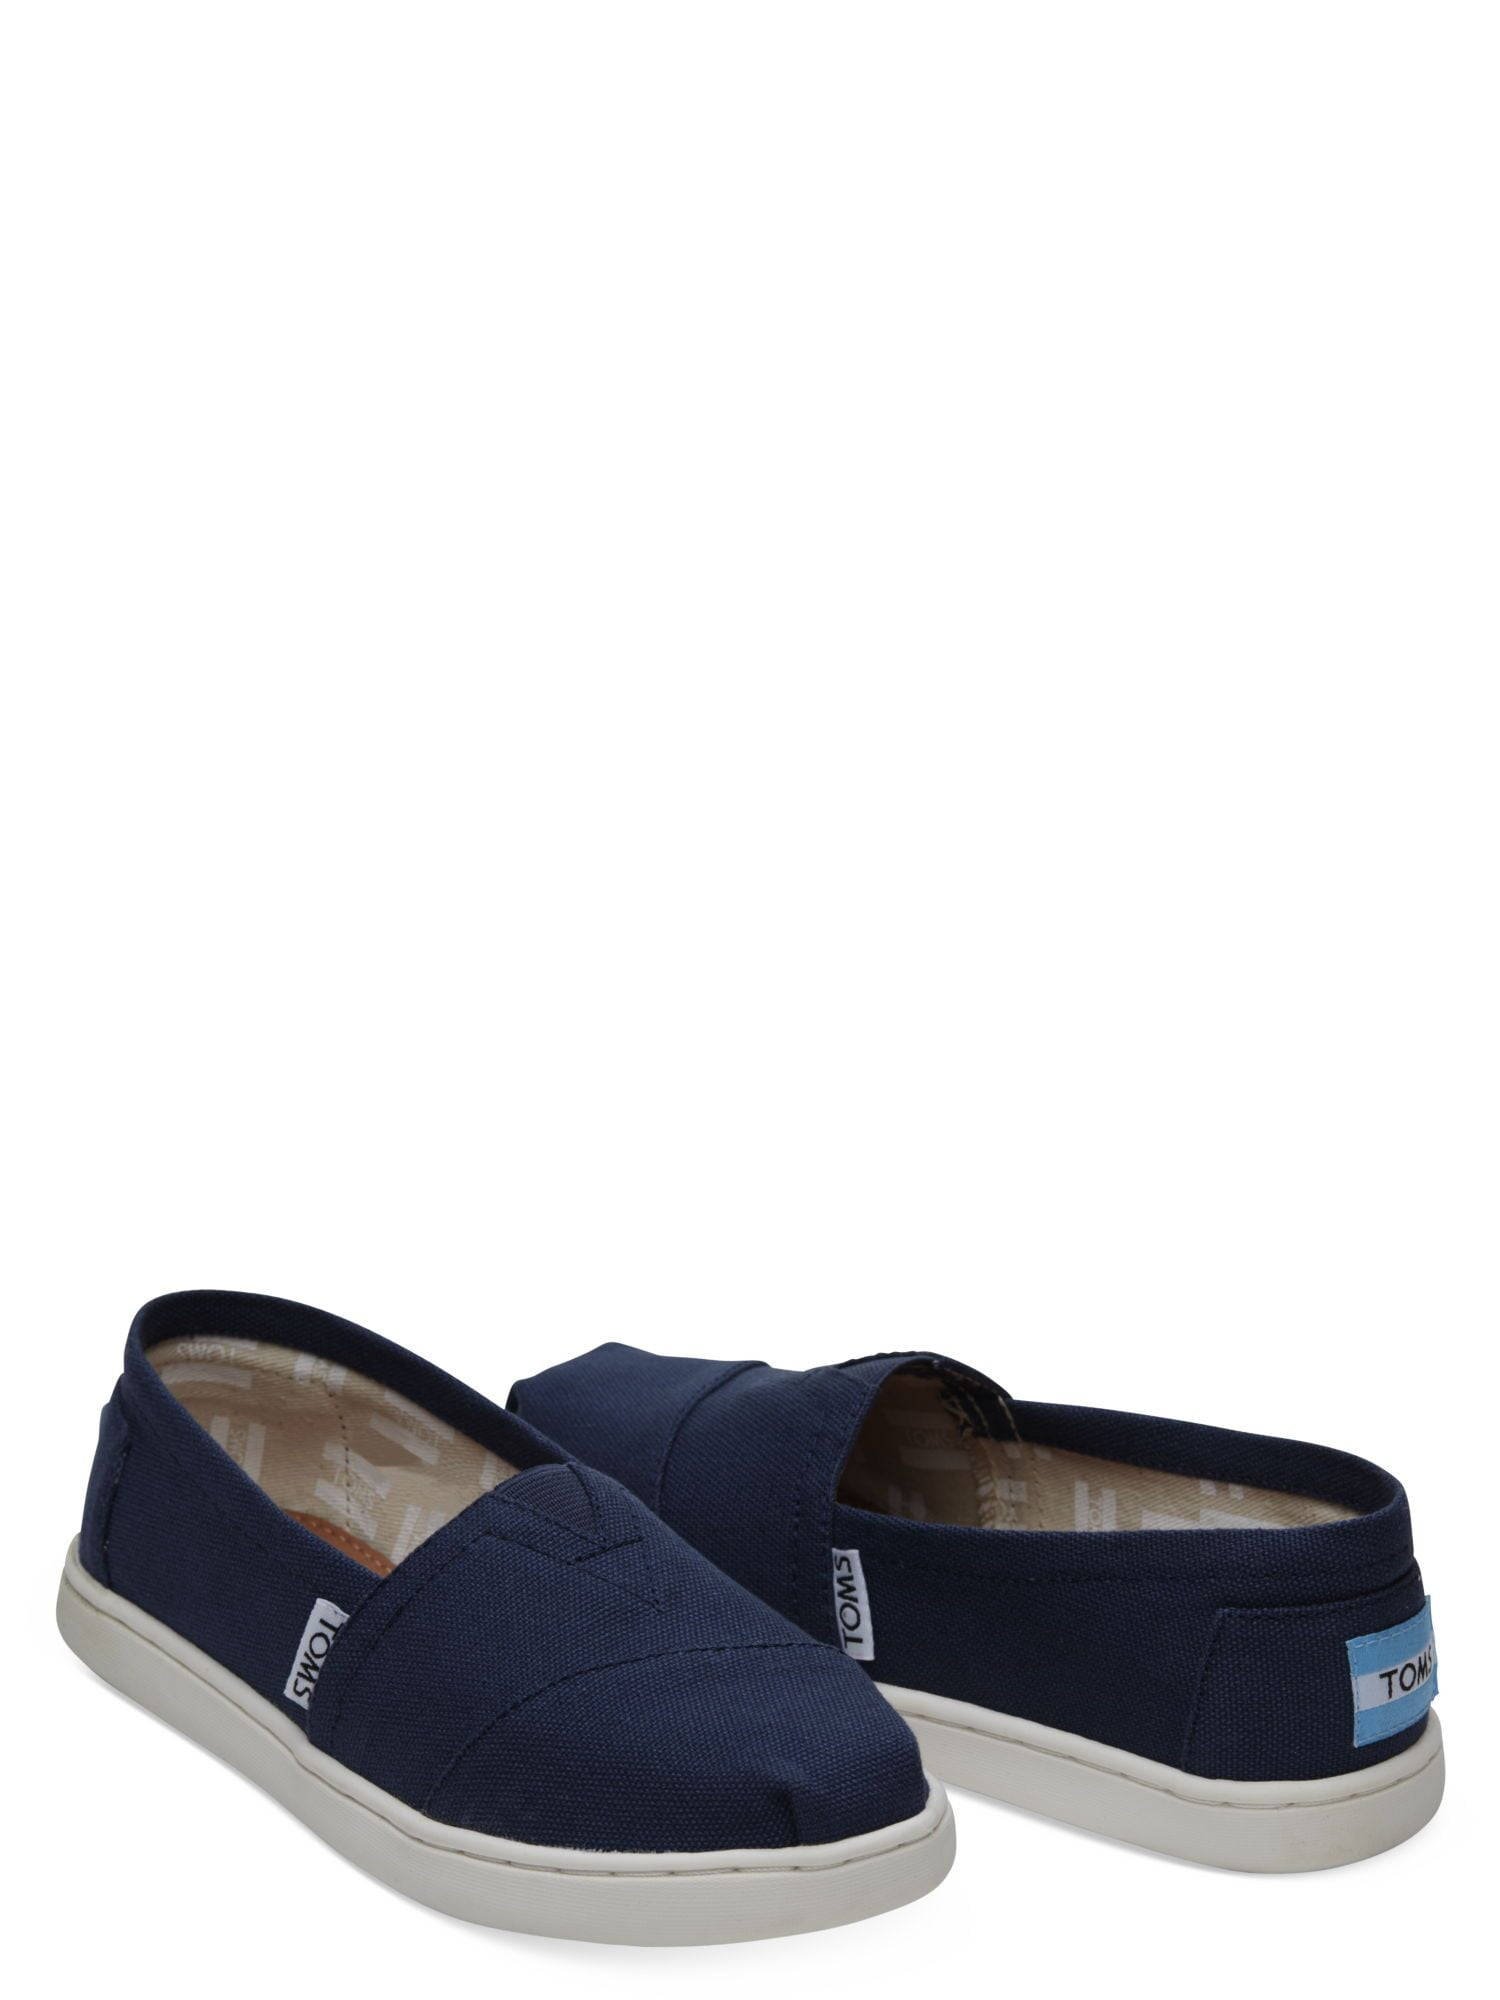 TOMS Youth Canvas Classic Slip-On Shoes 